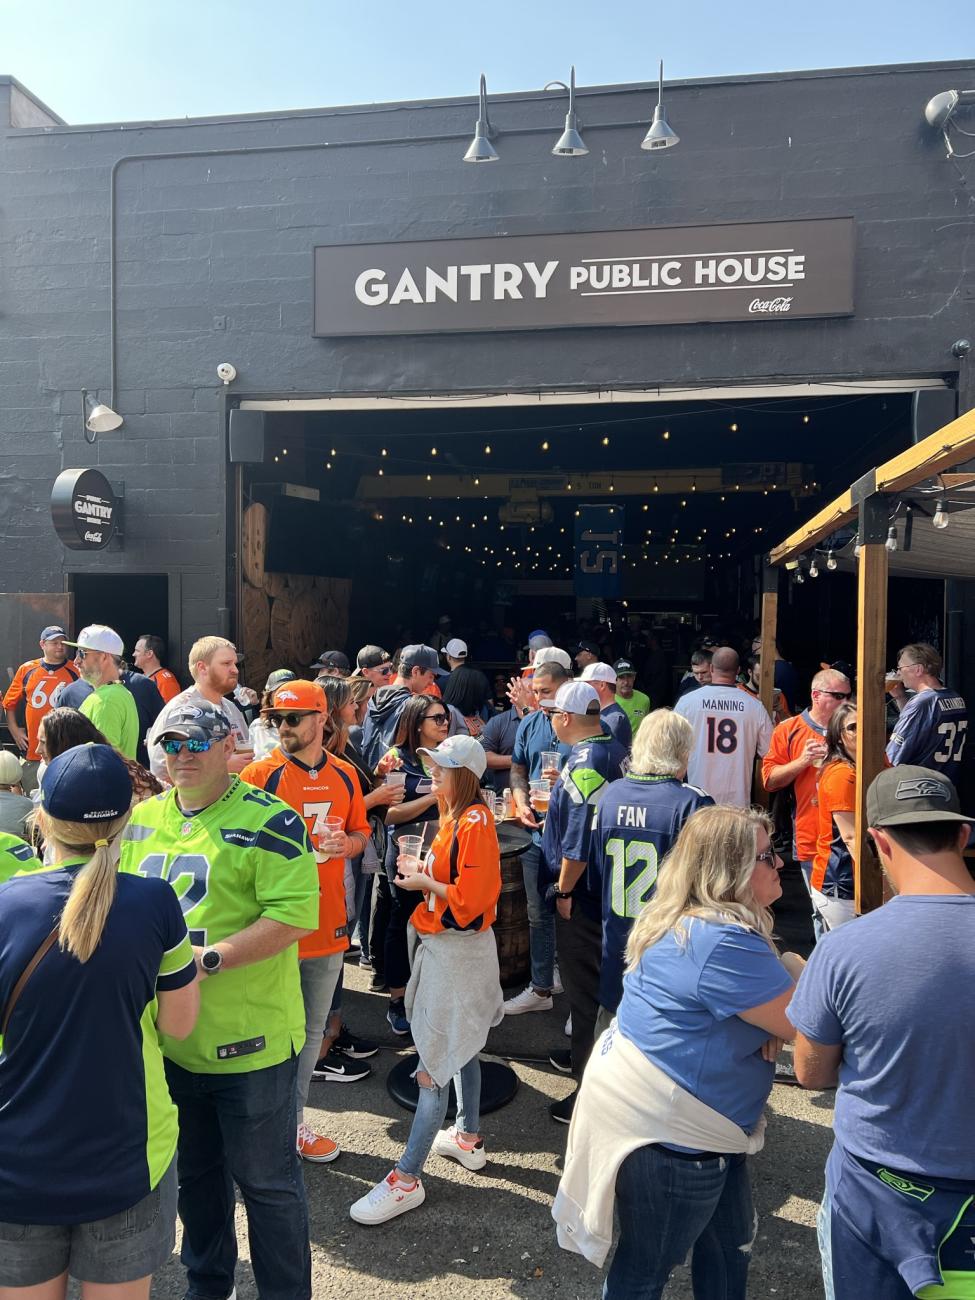 Seahawks fans gather outside Gantry Public House on a sunny day